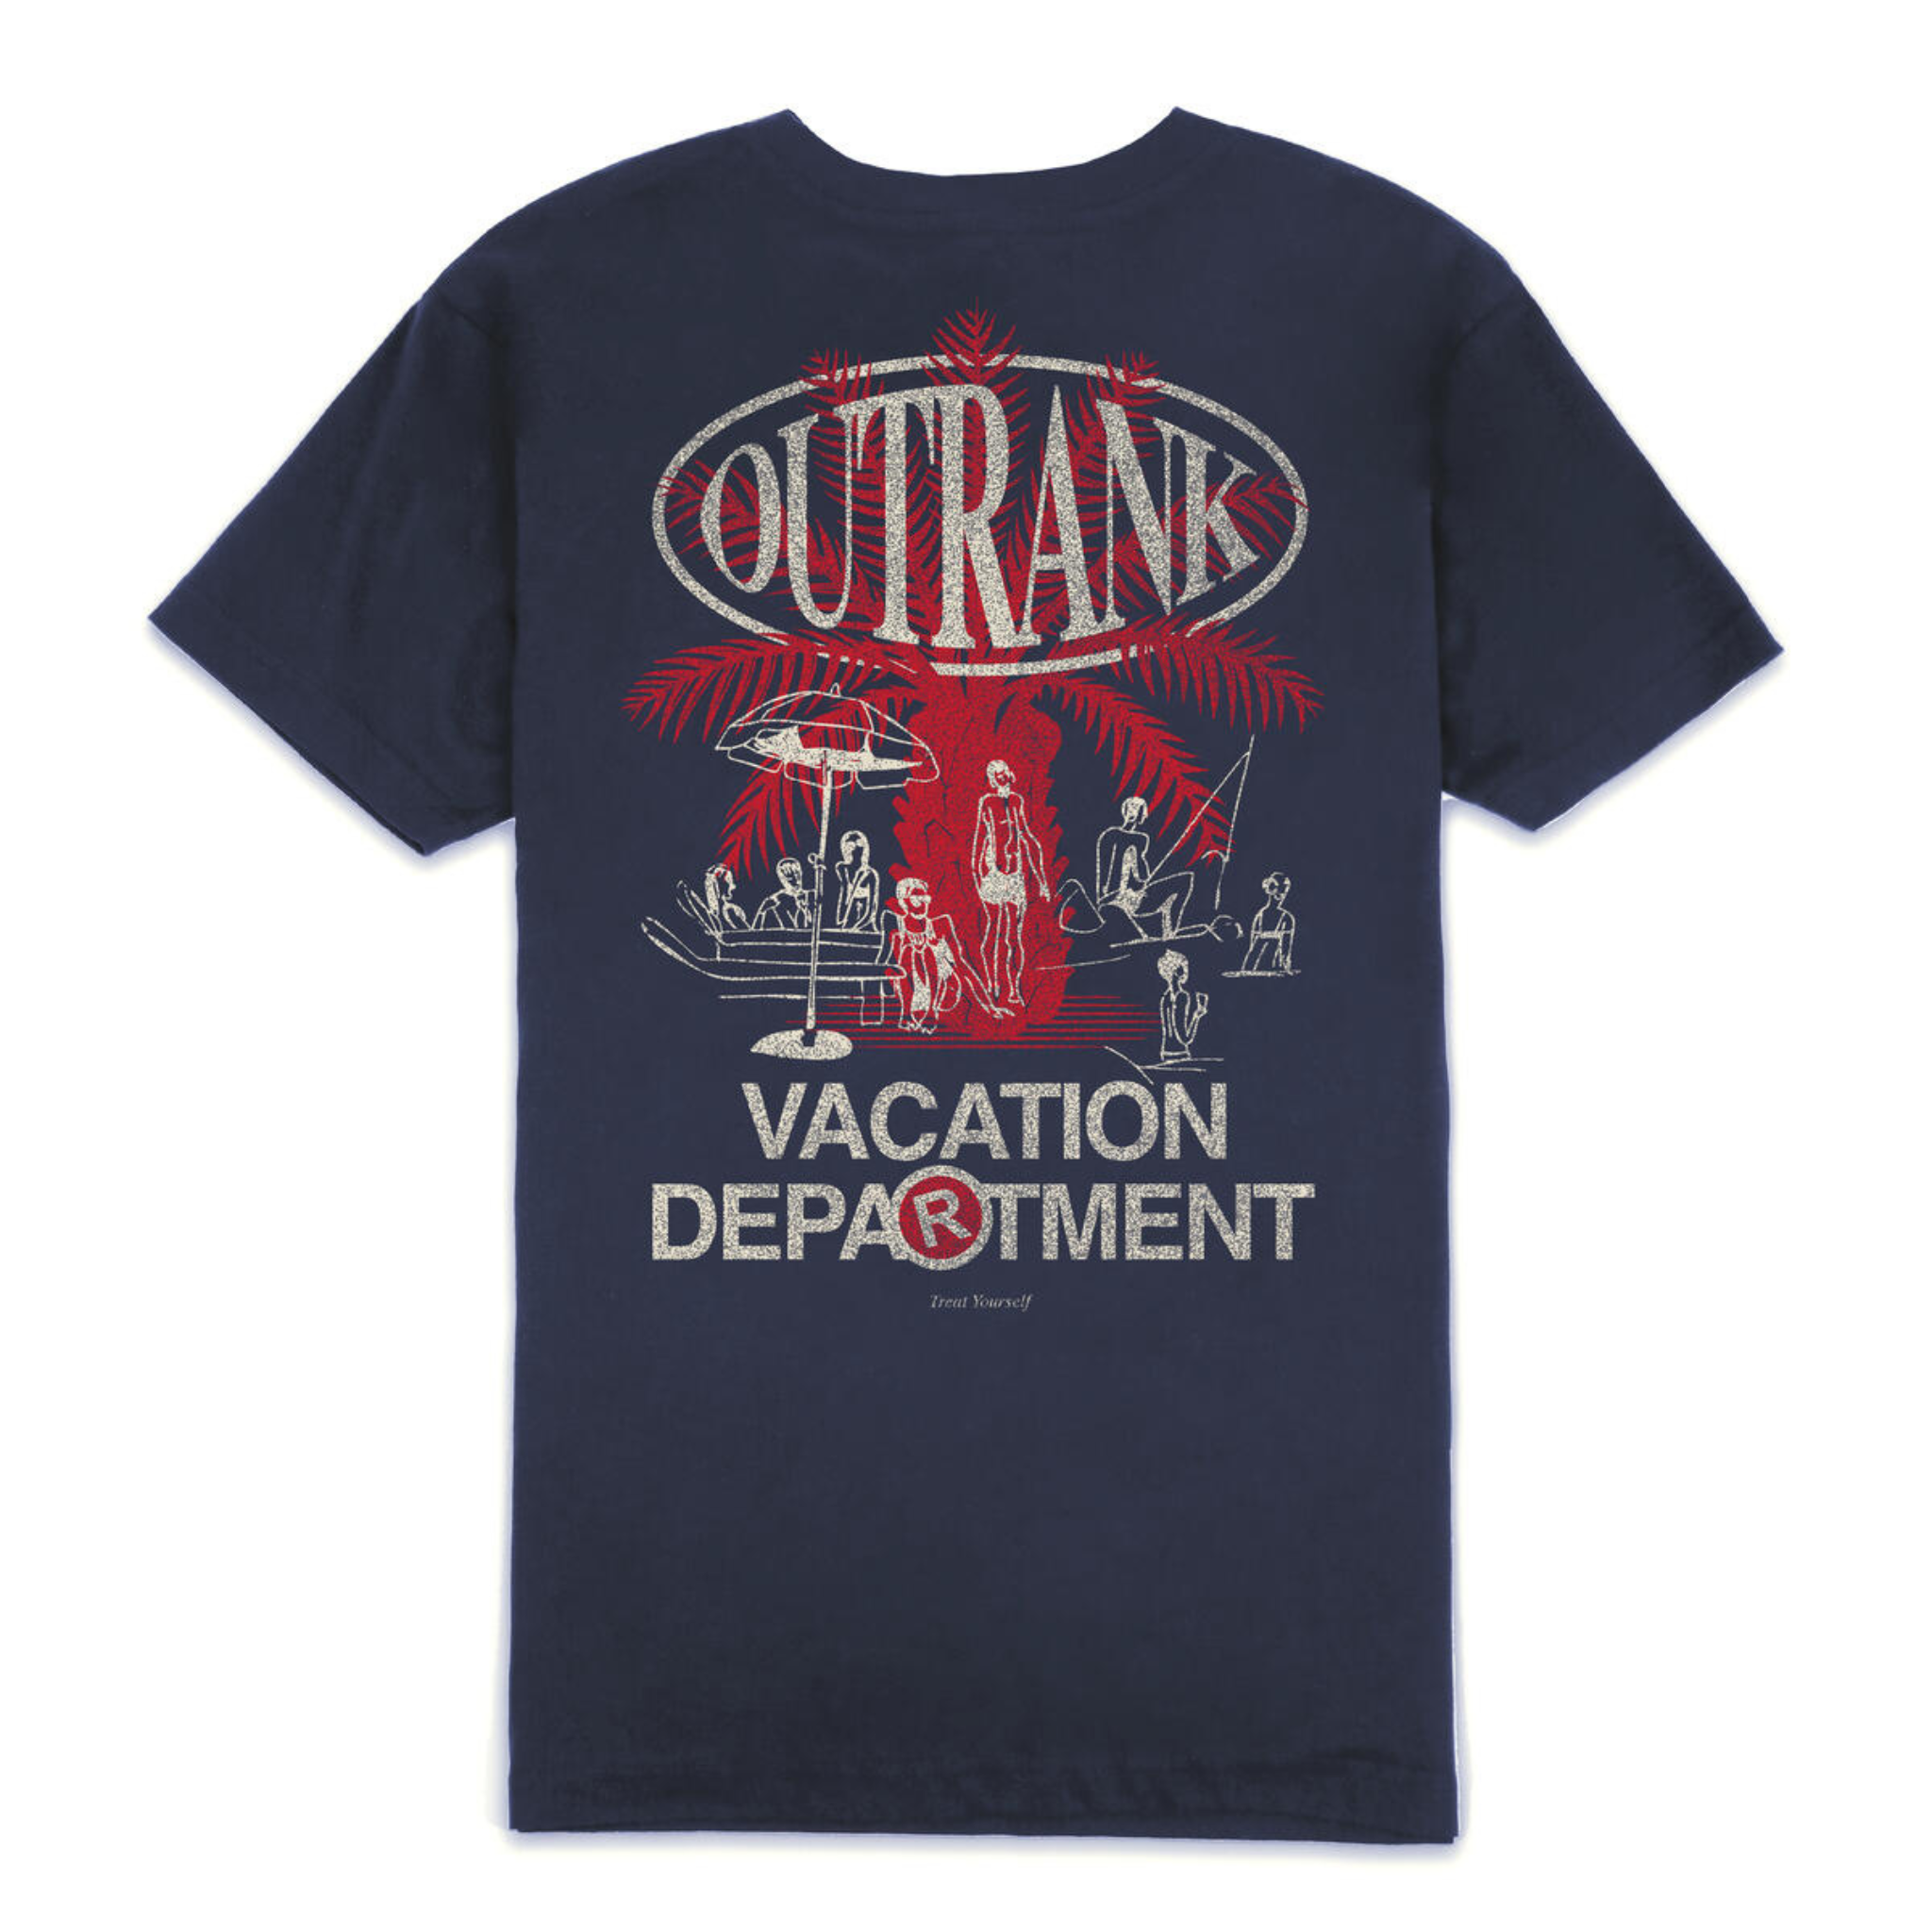 Outrank Vacation Department Tee (Navy)